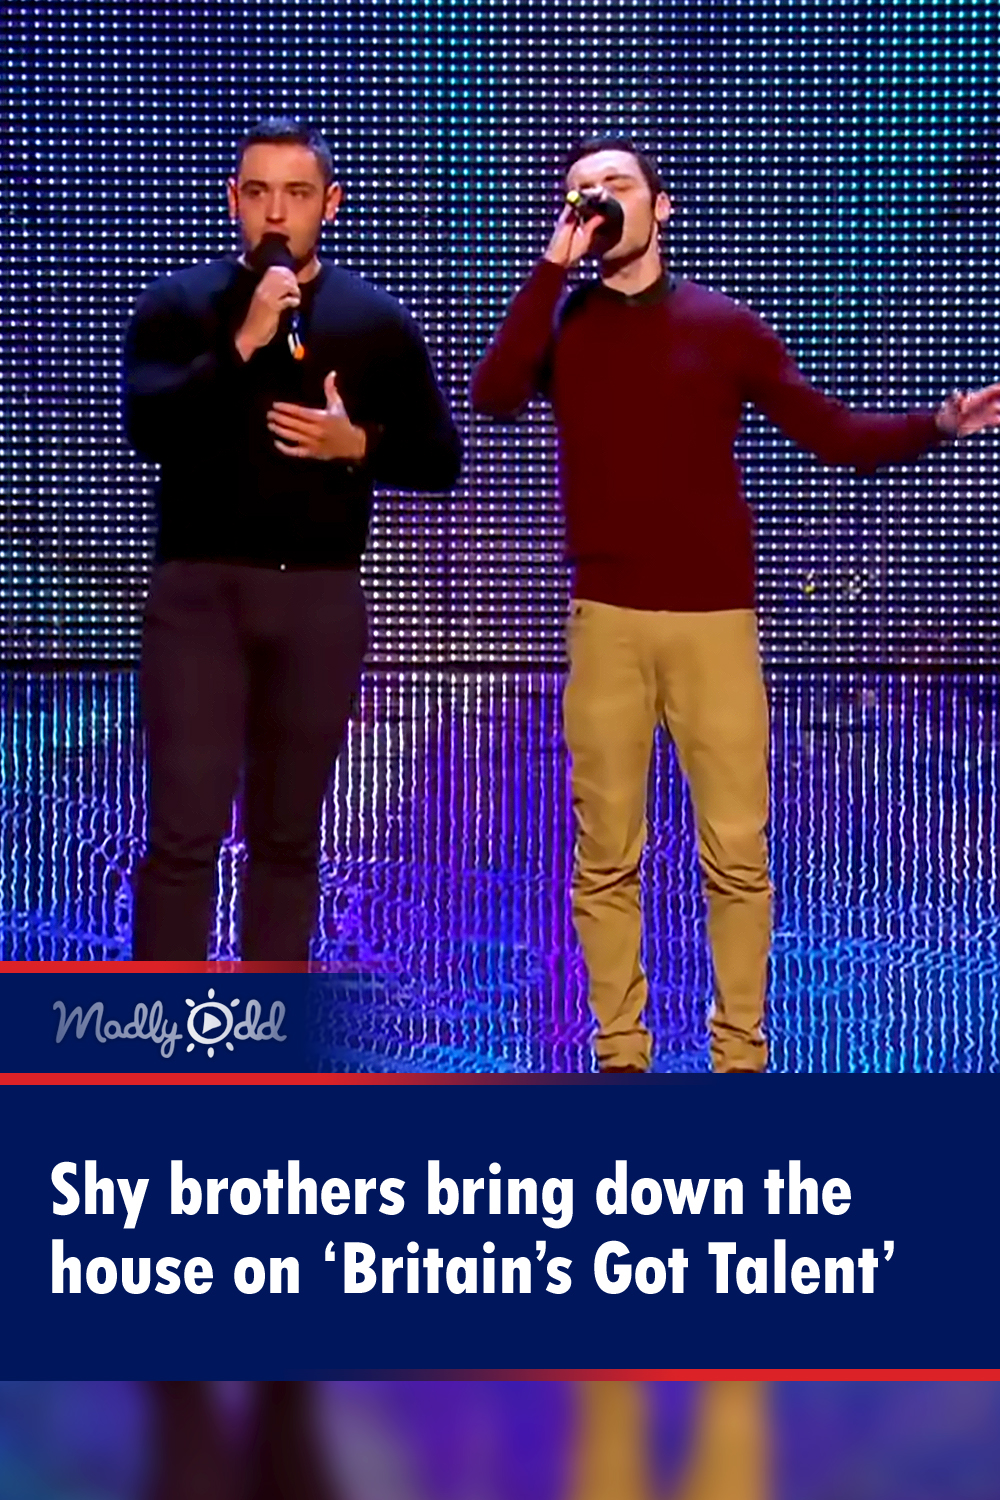 Shy brothers bring down the house on ‘Britain’s Got Talent’